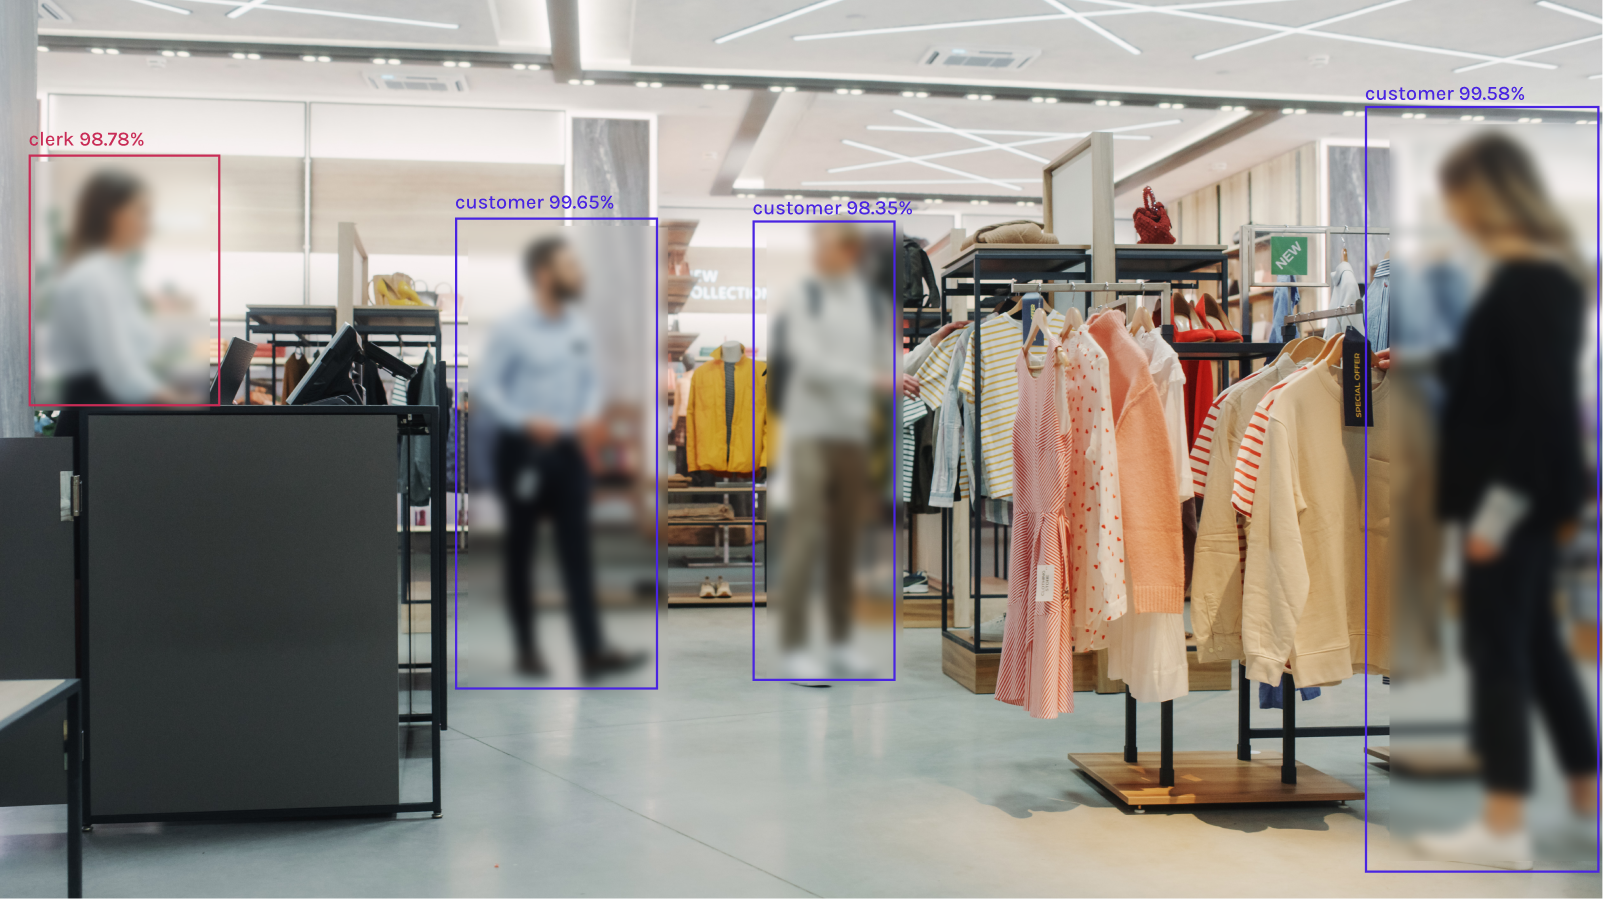 blurring the detection of customers in a store-4